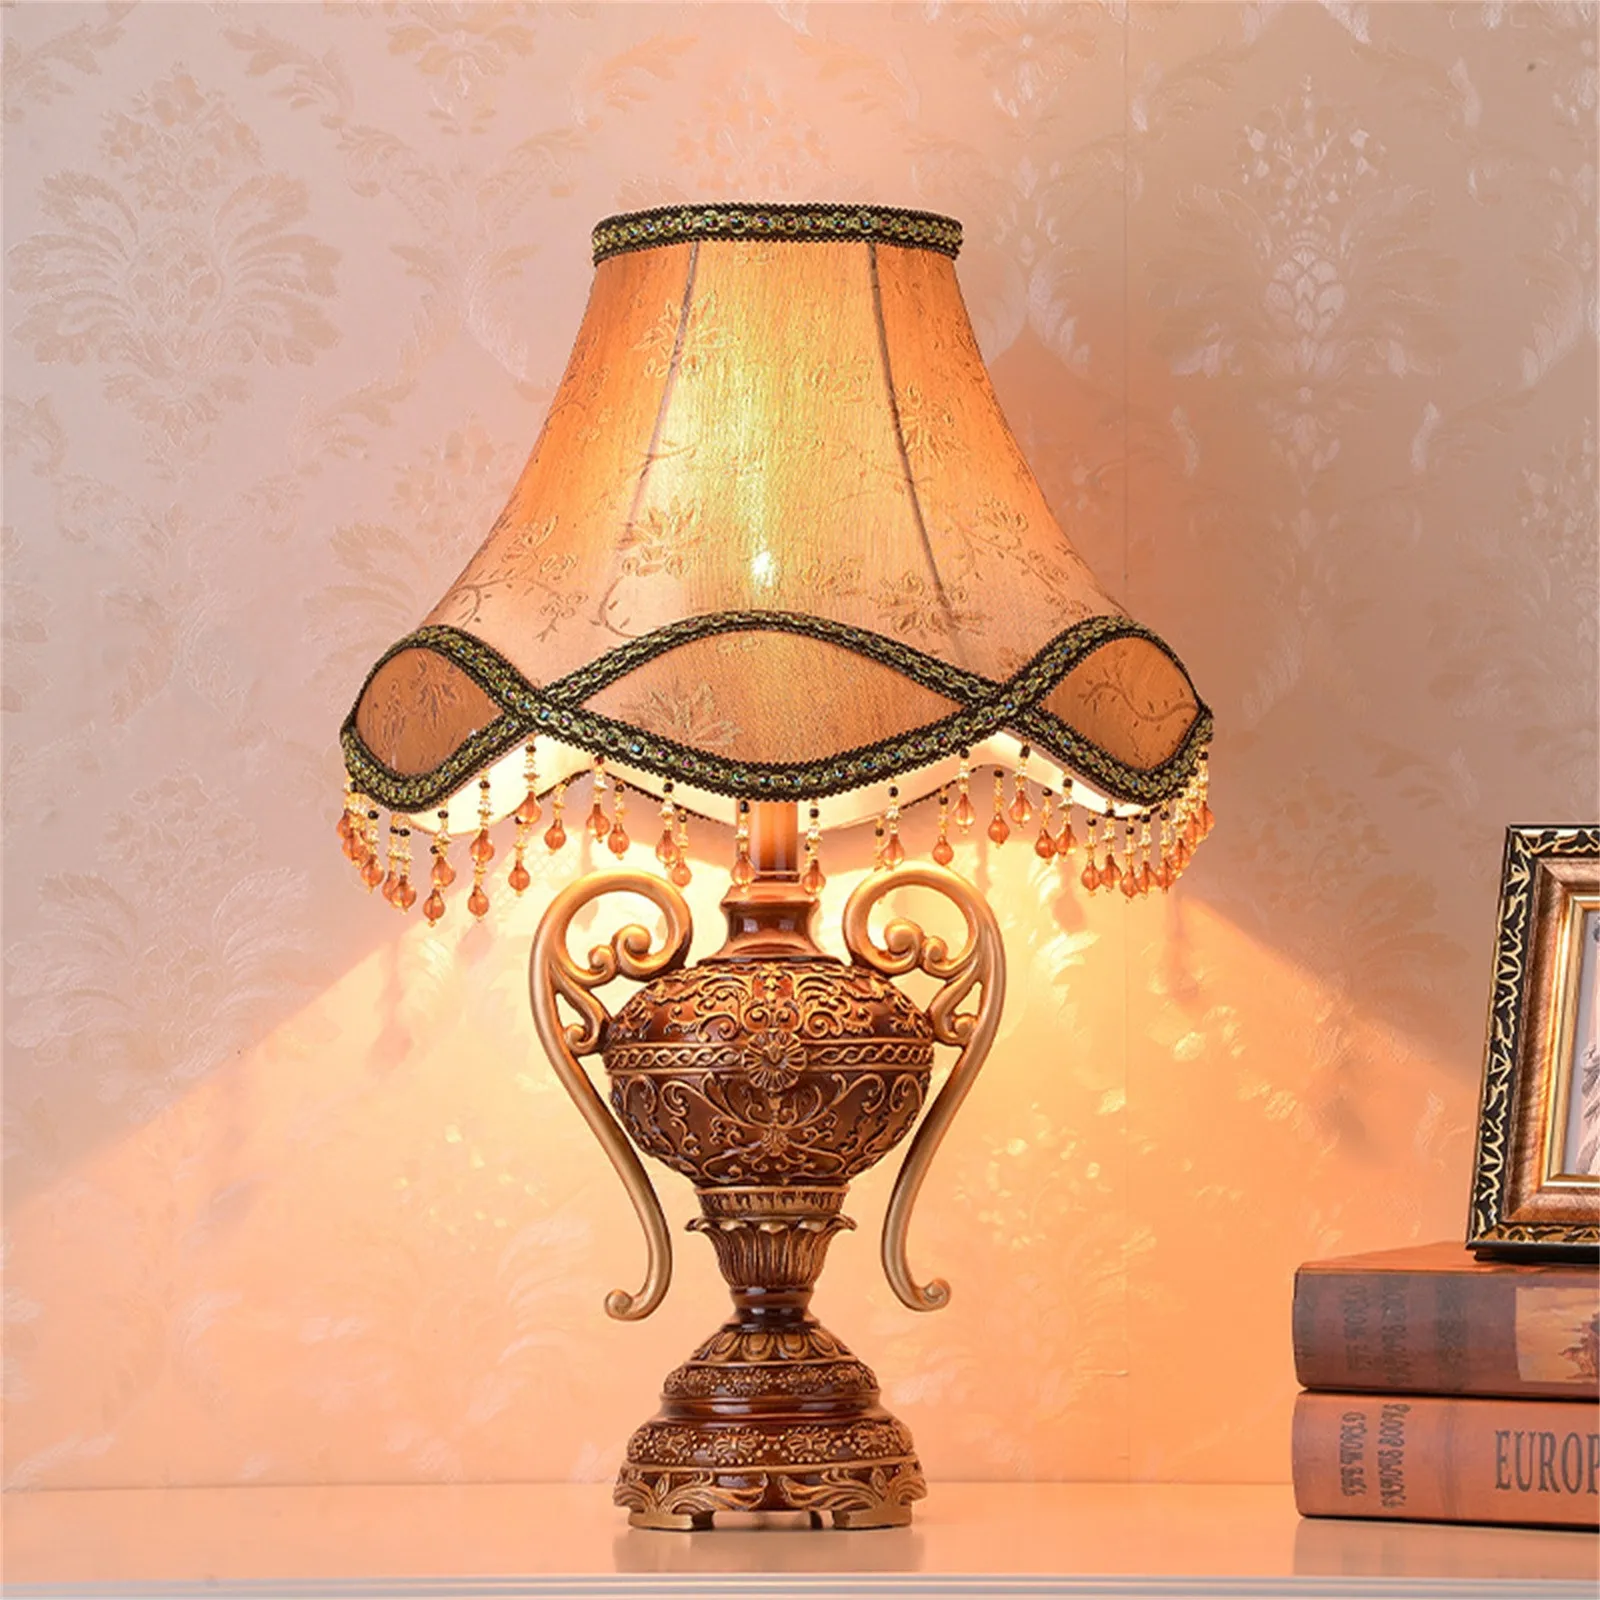 

Table Lamp Fabric Bedside Lamp Nightstand Lamp Desk Lamp With Cylinder Lamp Shade Warm Table Lamp Home Decor 독서등 책갈피 책상 조명